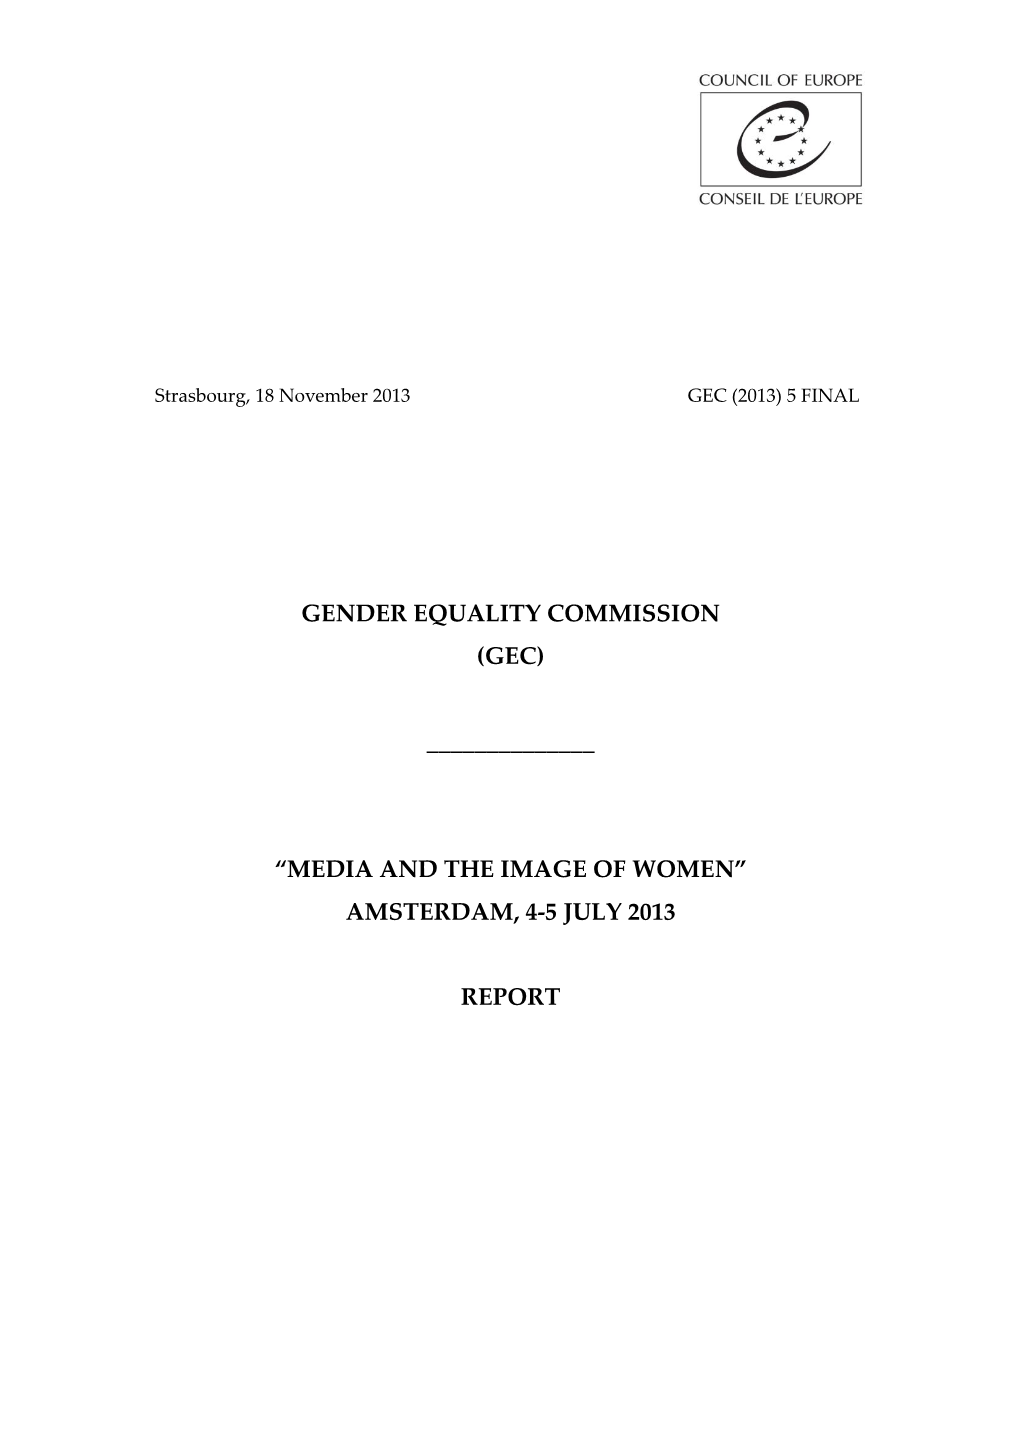 Gender Equality Commission (Gec) “Media and the Image